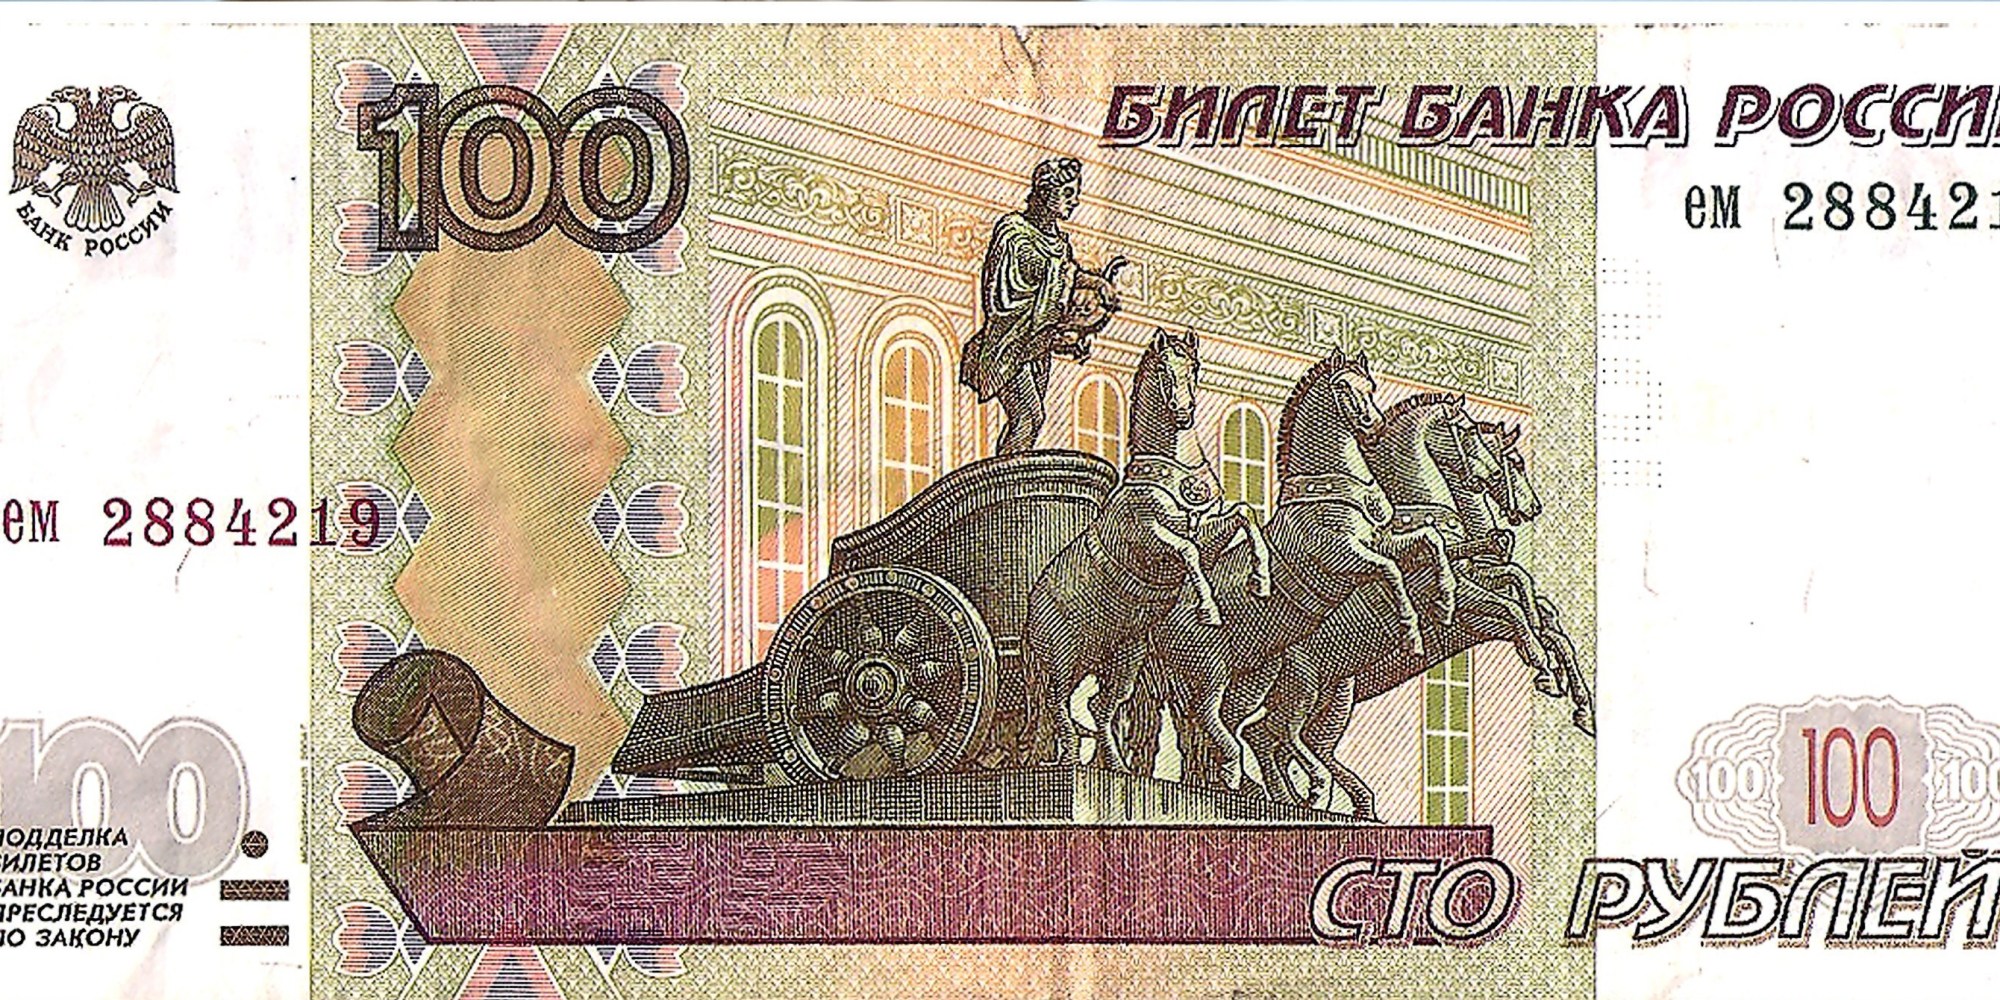 Russia's 100-Ruble Banknote With Naked Apollo Image Is ...